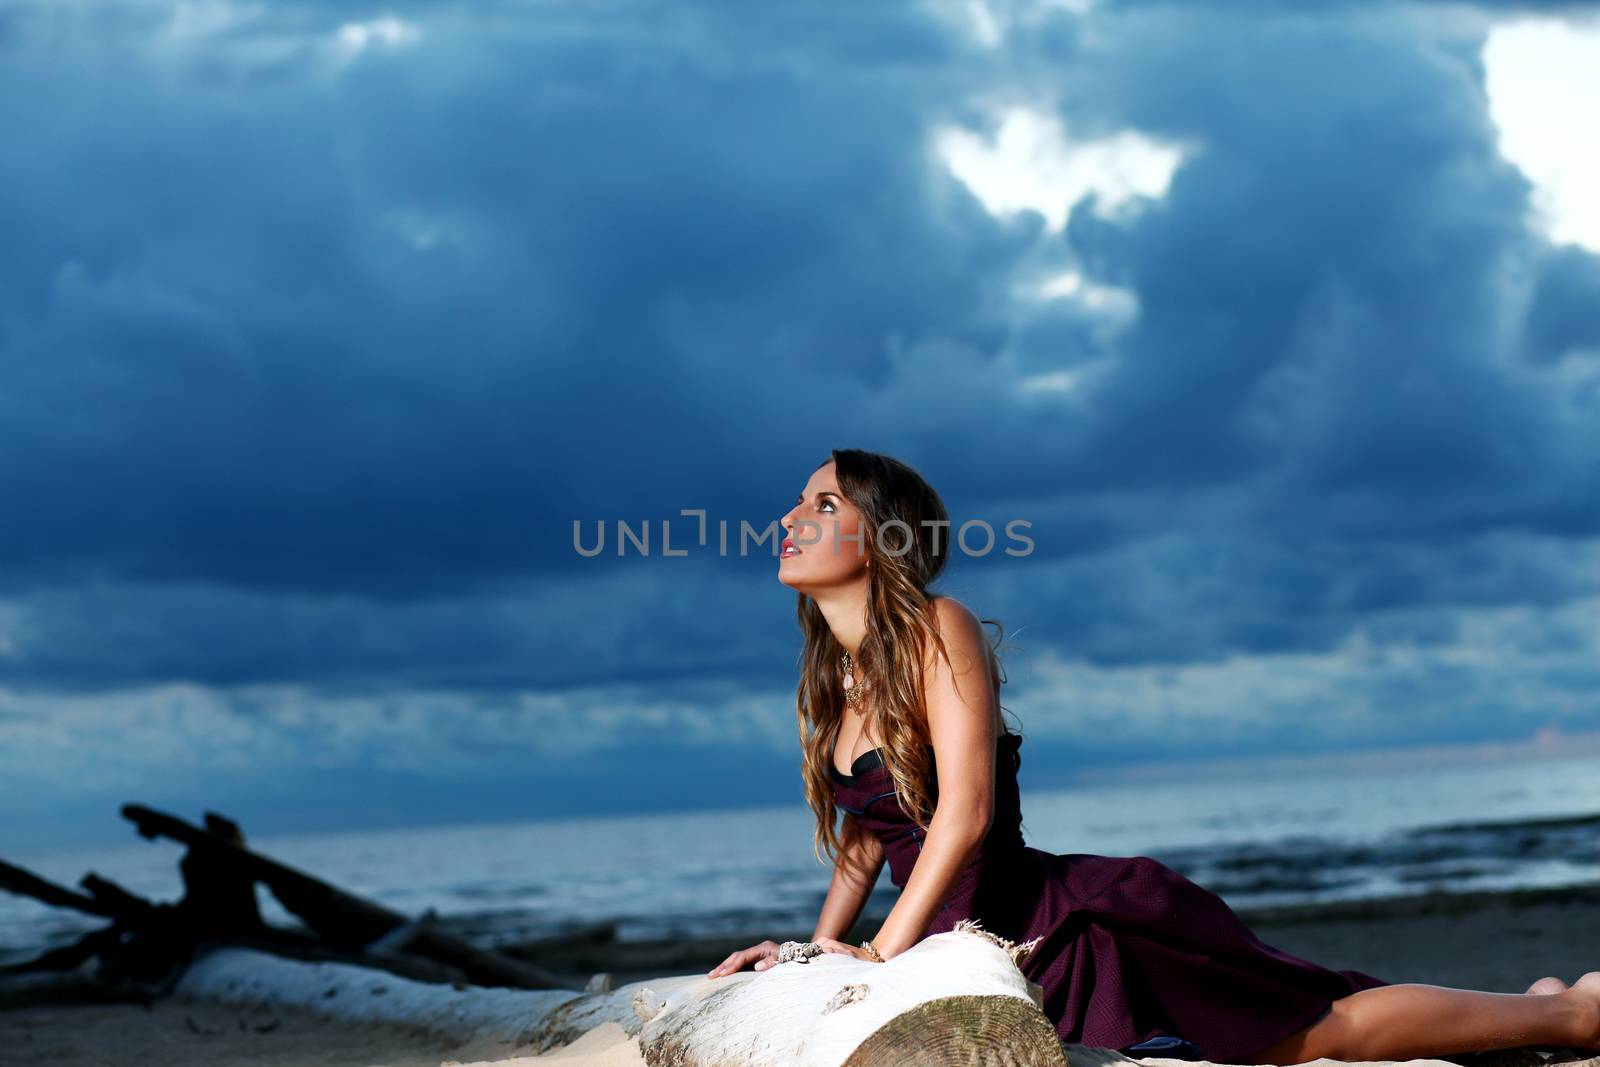 Beautiful girl with brown hair who is wearing a dark purple dress is posing at a beach over a dark sky background